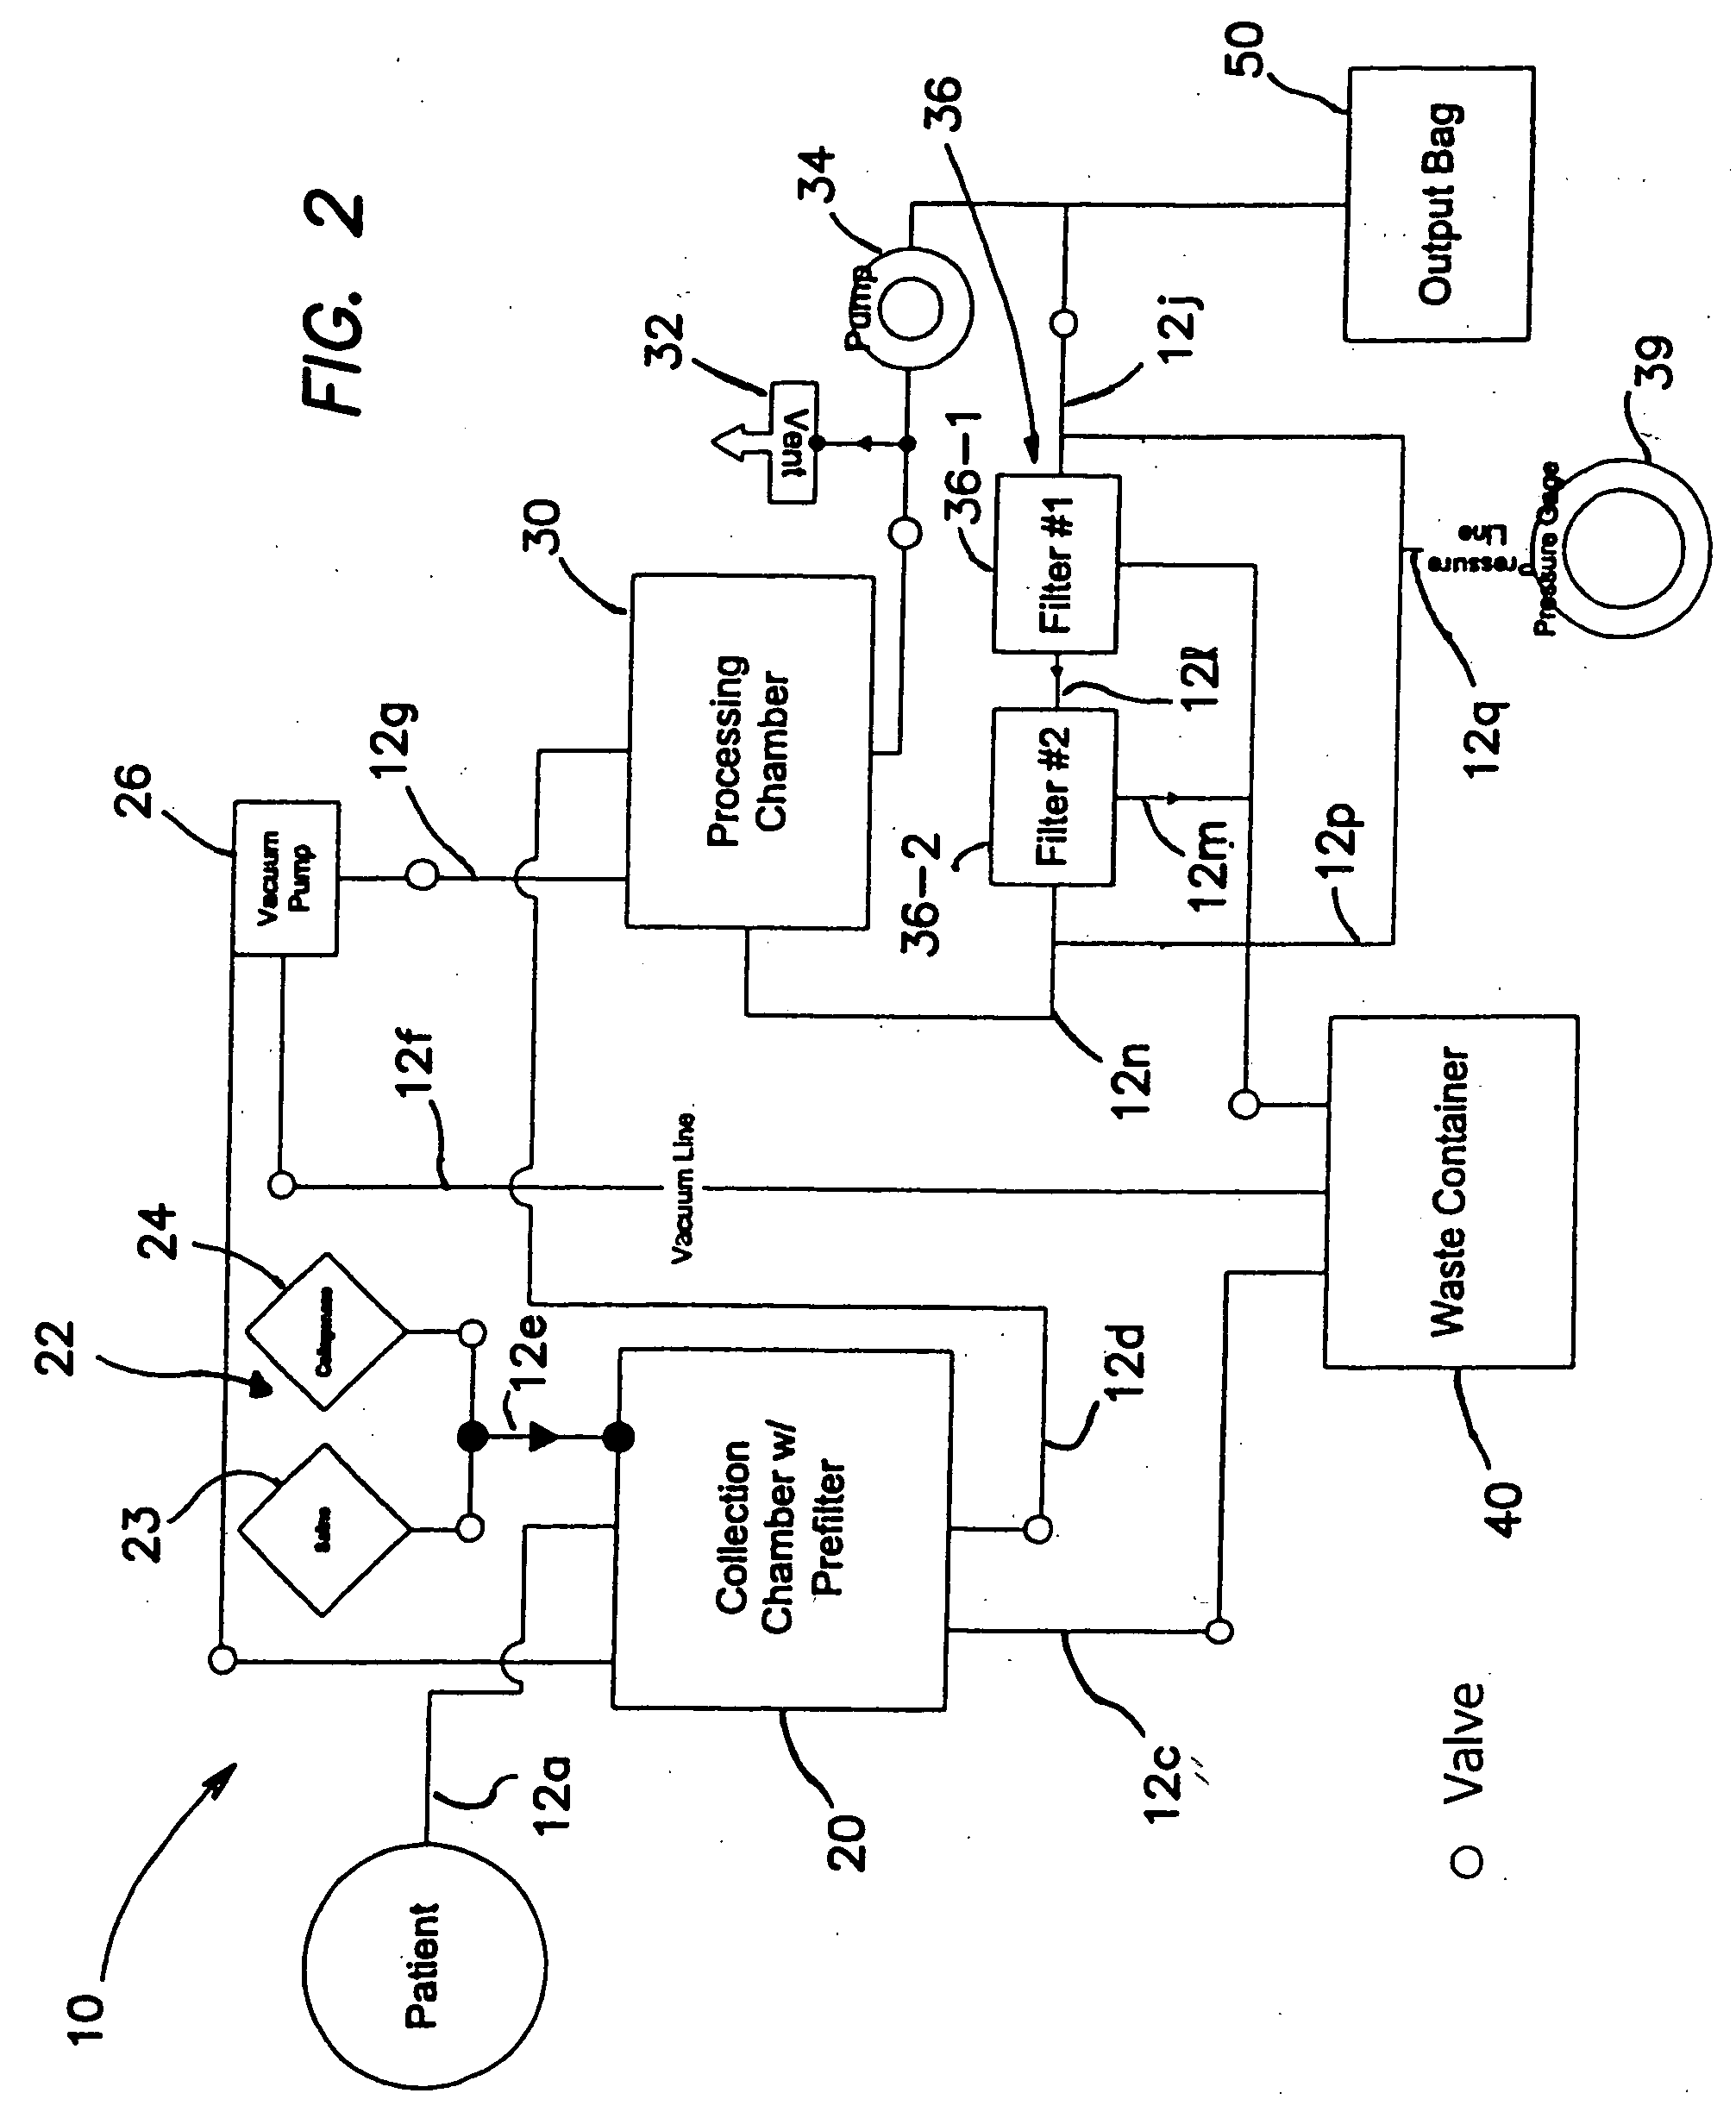 Methods of using regenerative cells in the treatment of inherited and acquired disorders of the bone, bone marrow, liver, and other tissues